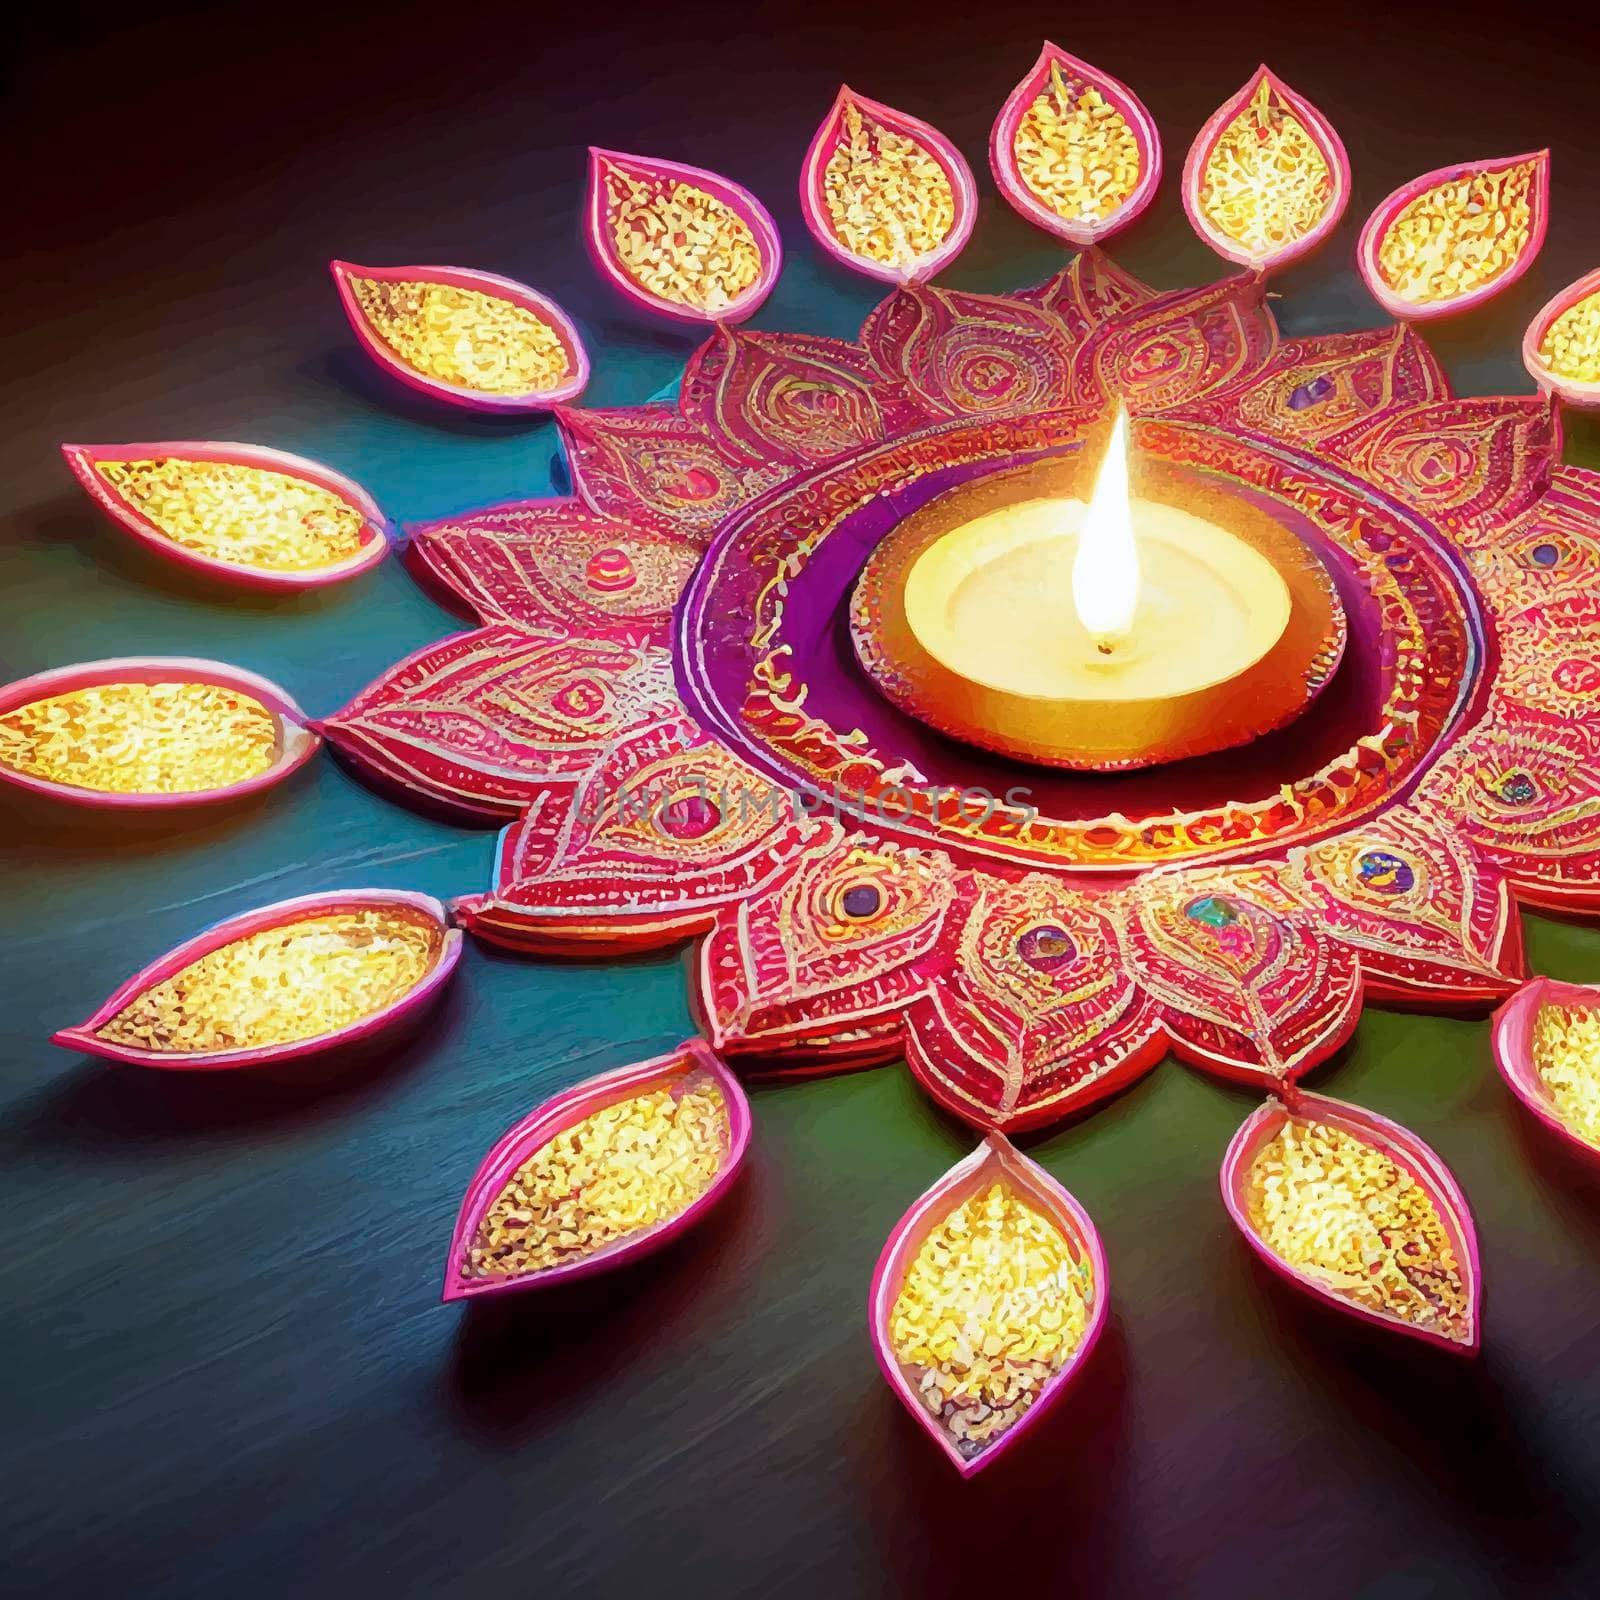 illustration of the Oil lamps lit in the colorful rangoli during the celebration of diwali